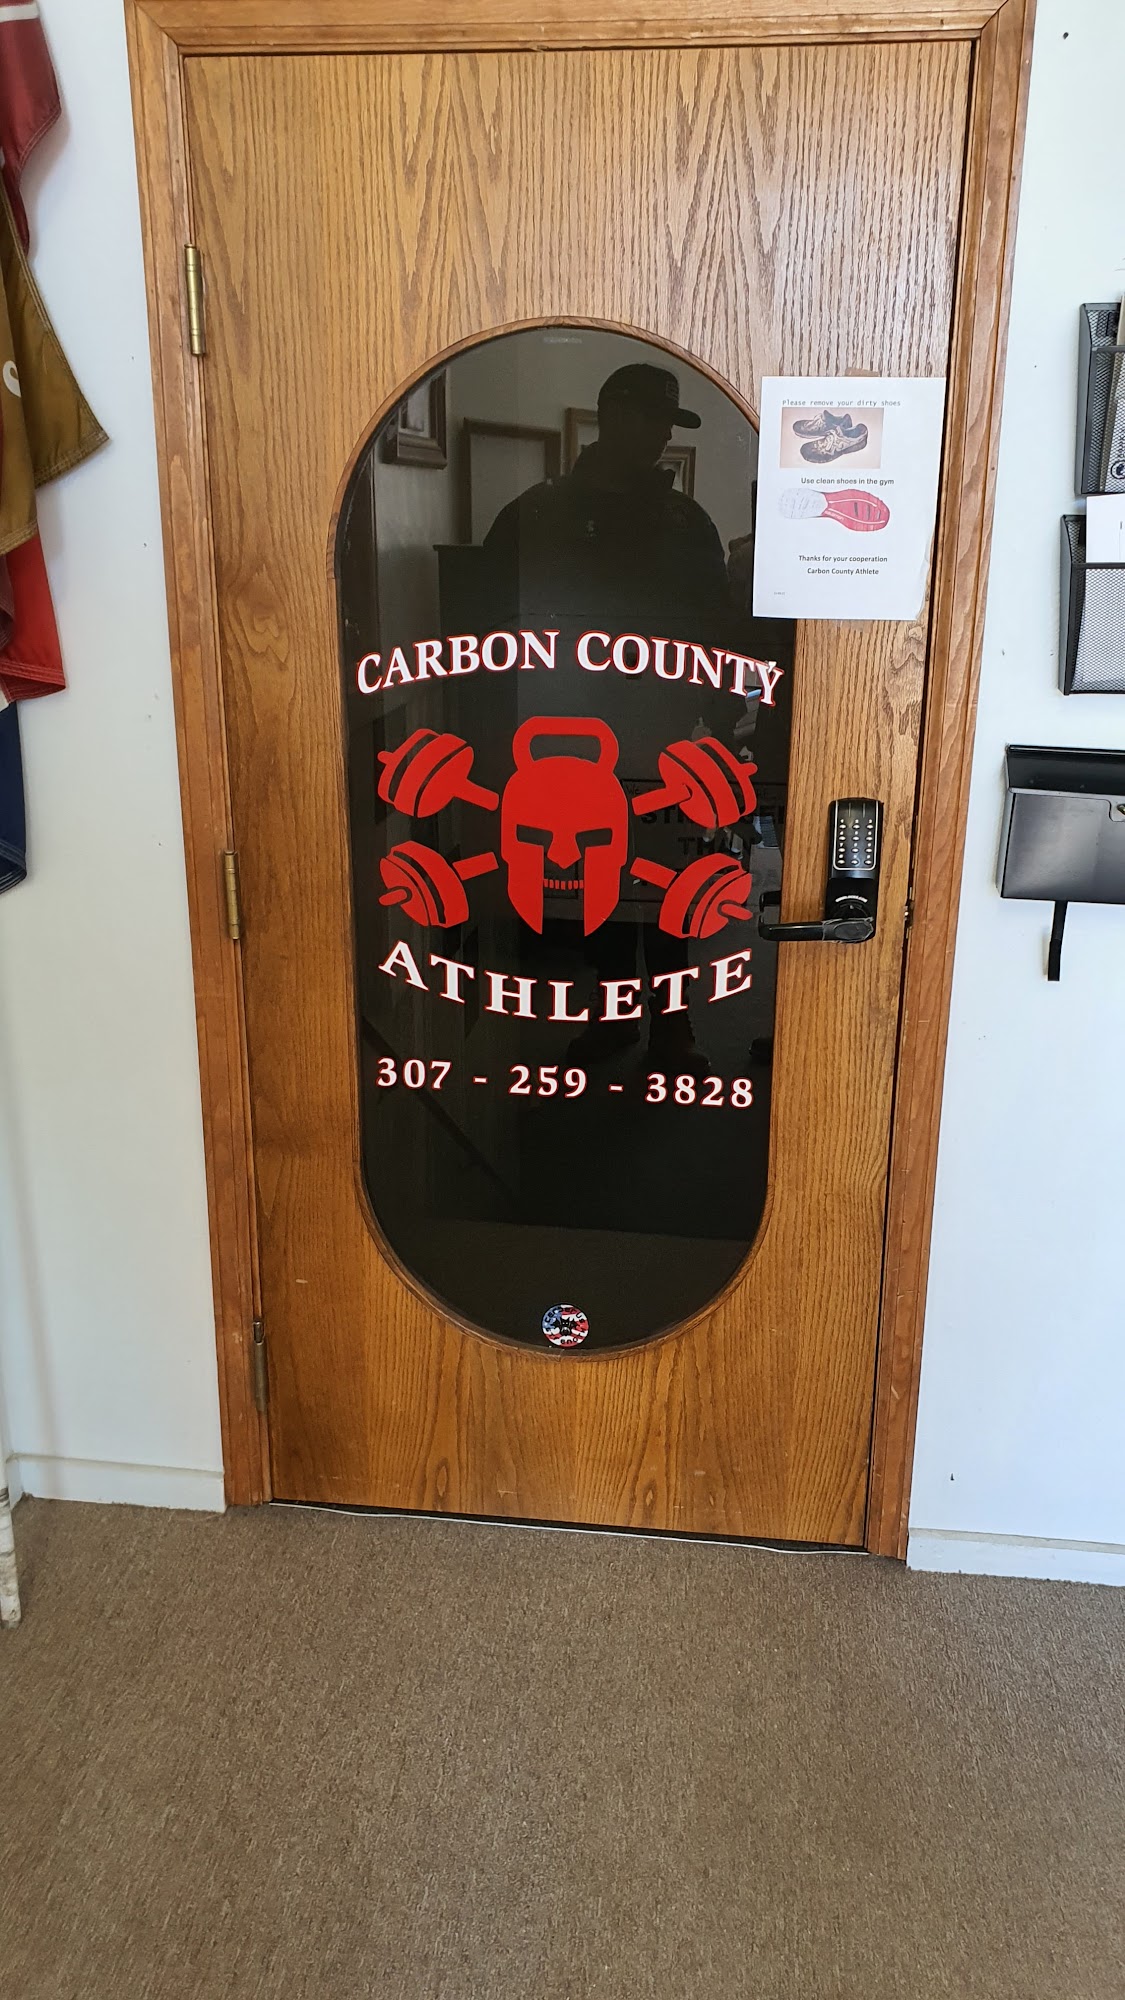 Carbon County Athlete Gym 214 4th St, Rawlins Wyoming 82301